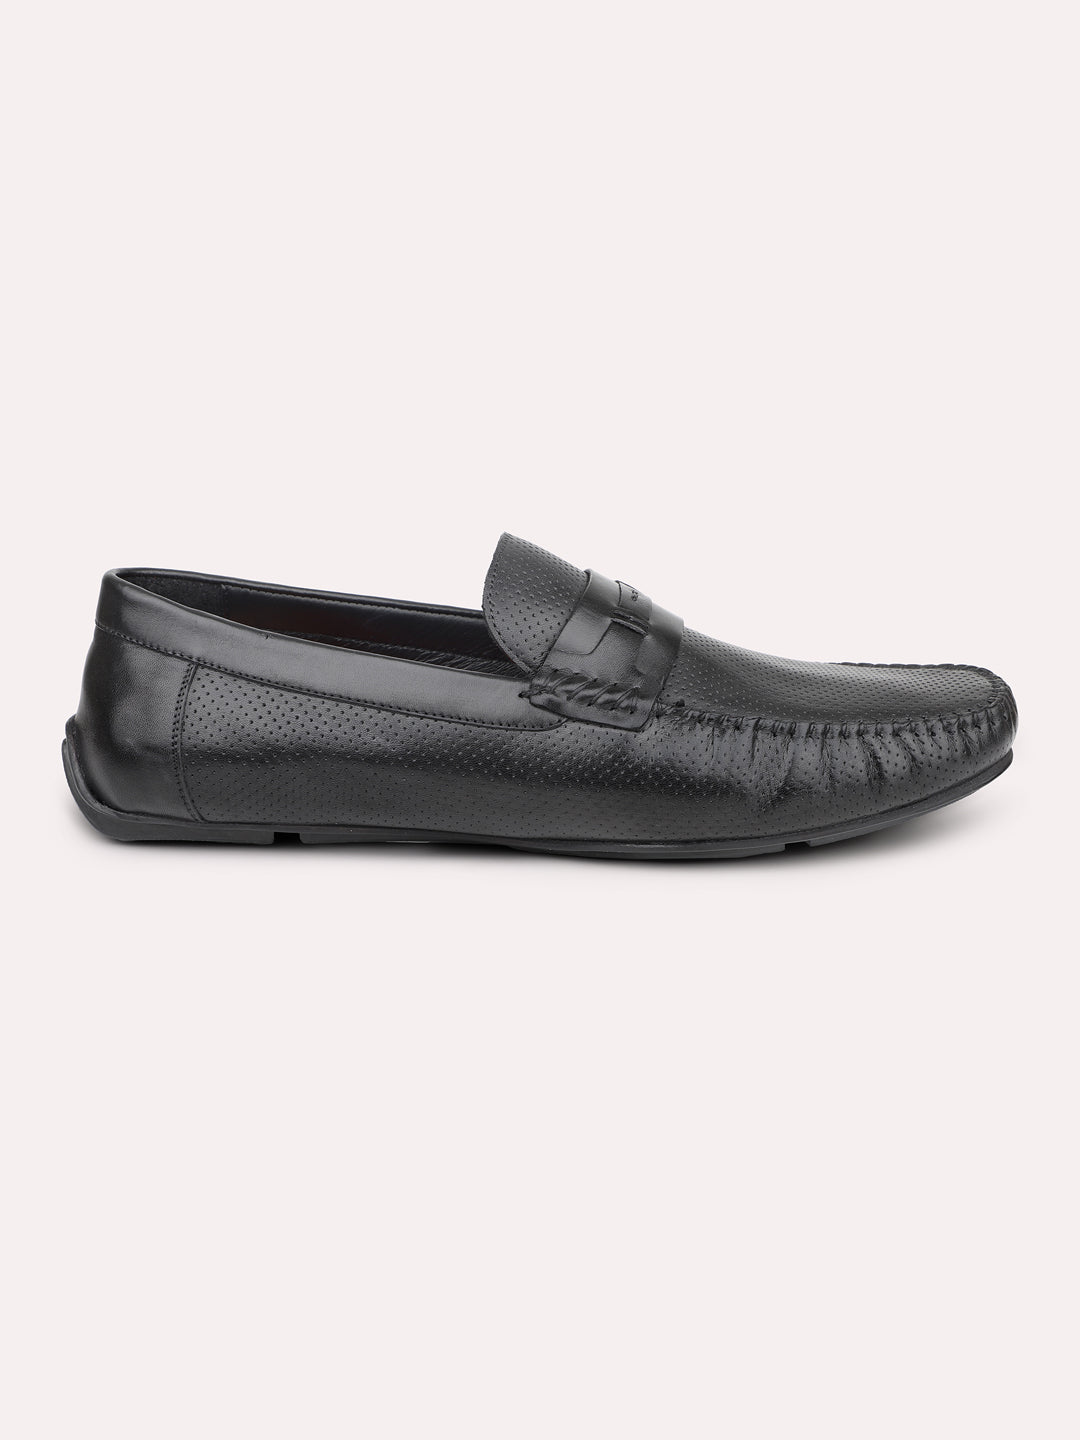 Atesber Black Driving Casual Shoes For Men's